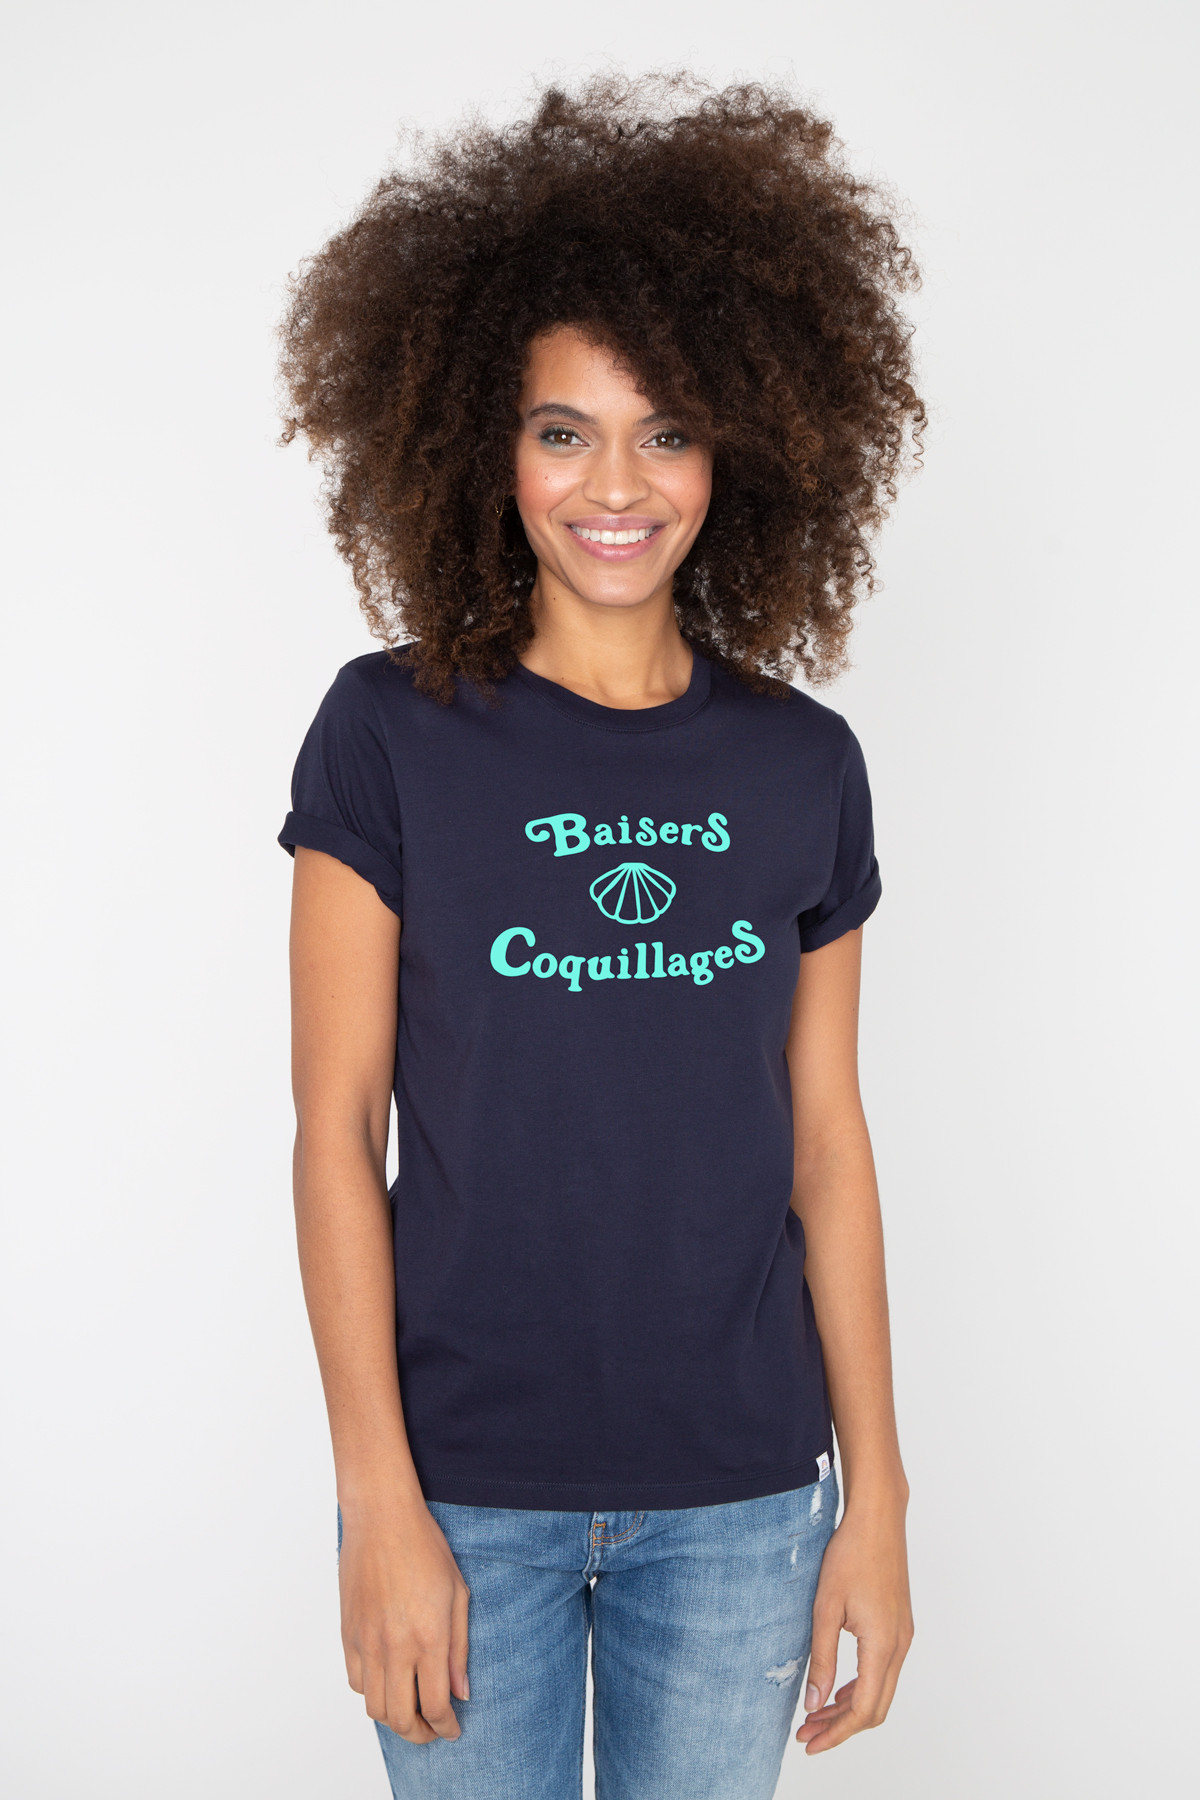 Photo de T-SHIRTS COL ROND Tshirt BAISERS & COQUILLAGES chez French Disorder